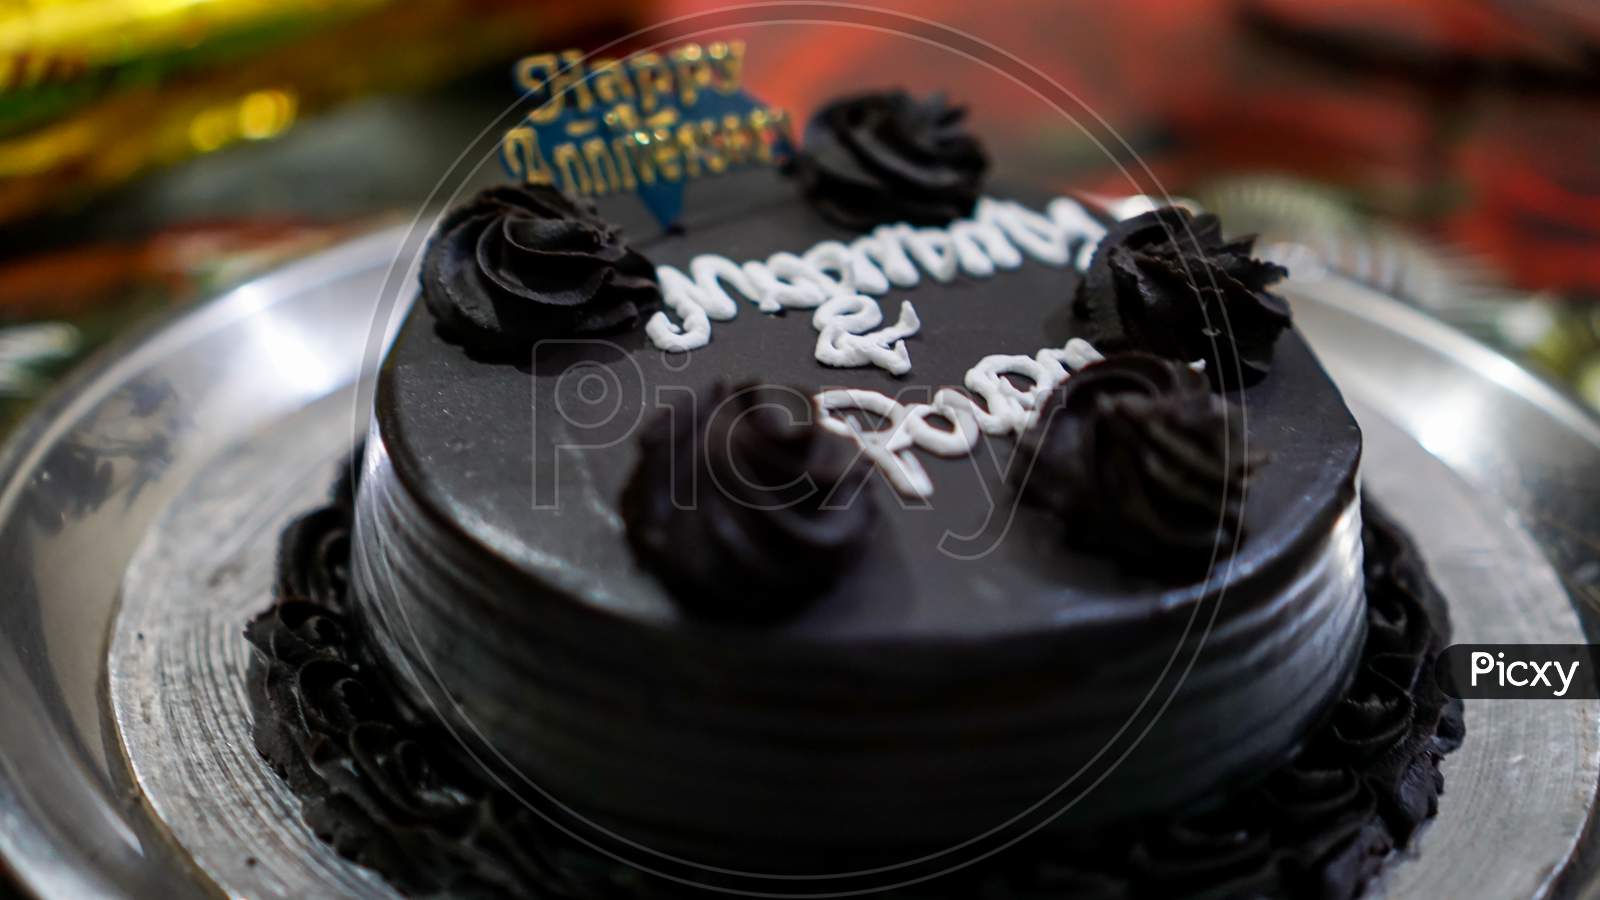 Happy Marriage Anniversary Chocolate Cake For Parents